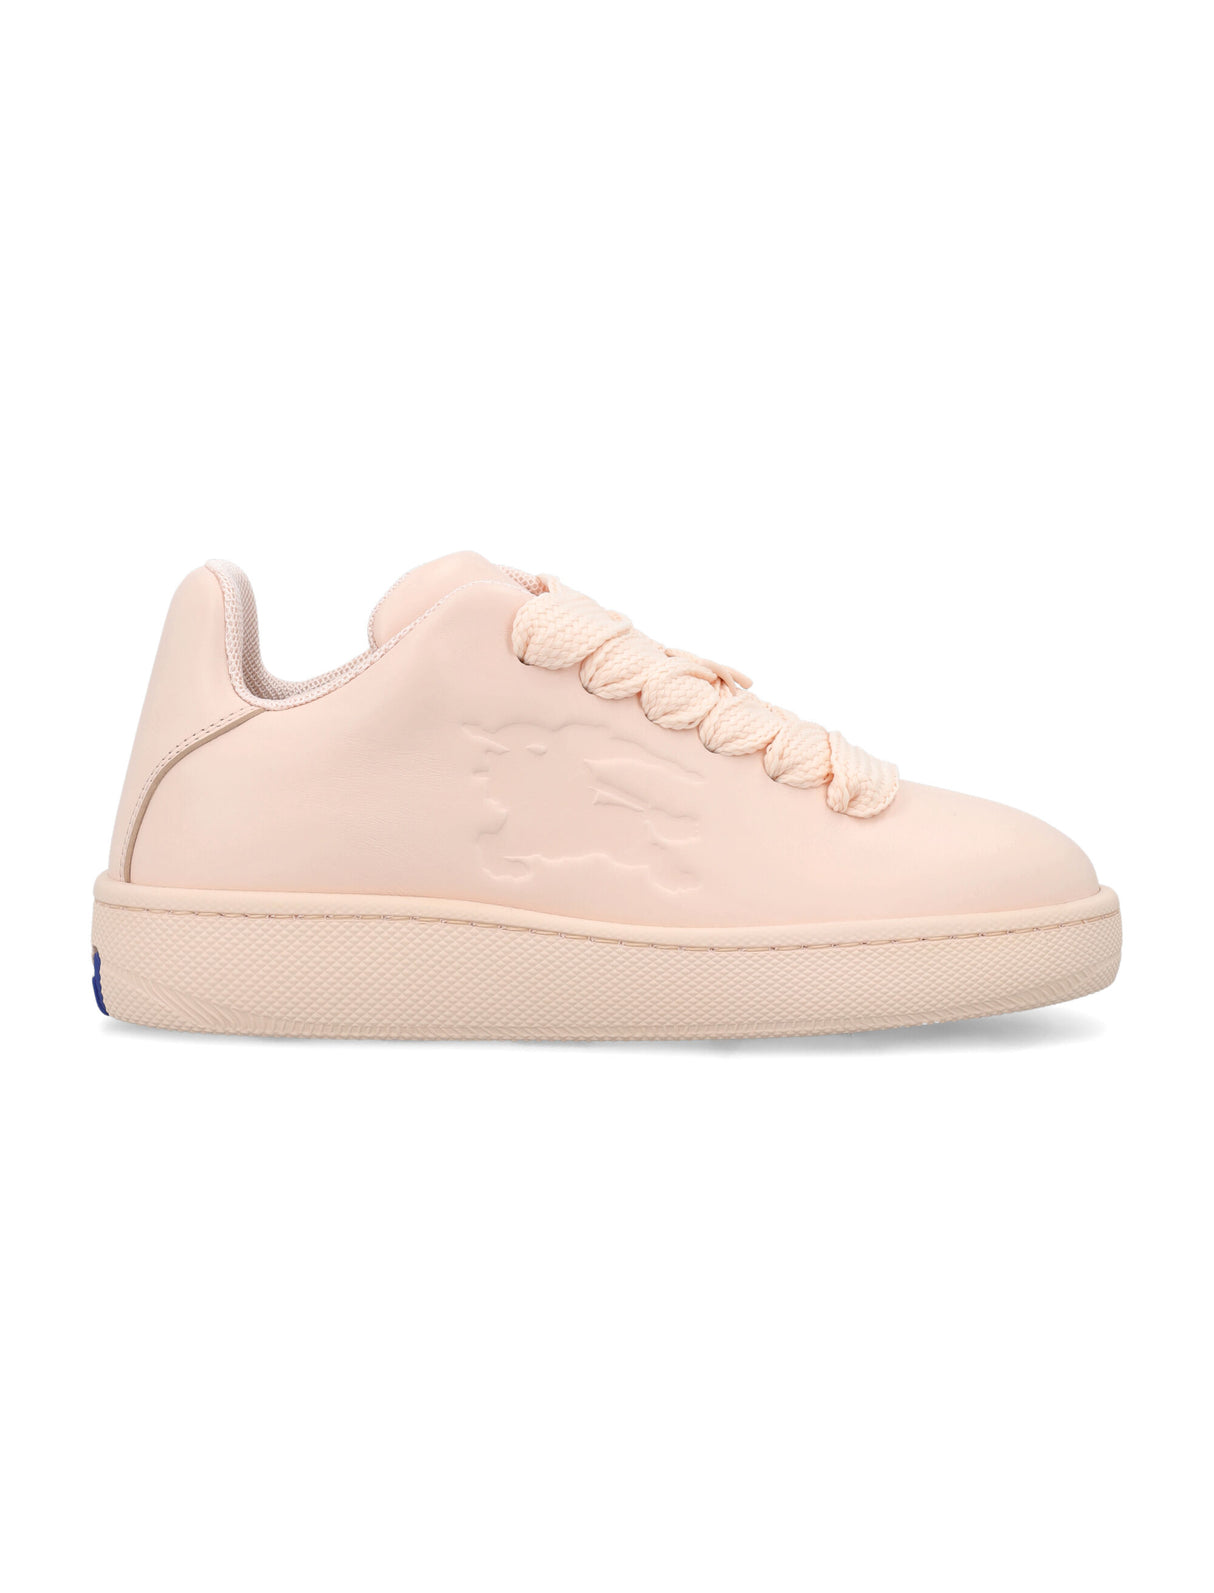 BABY NEON Leather Box Sneakers for Women by Burberry